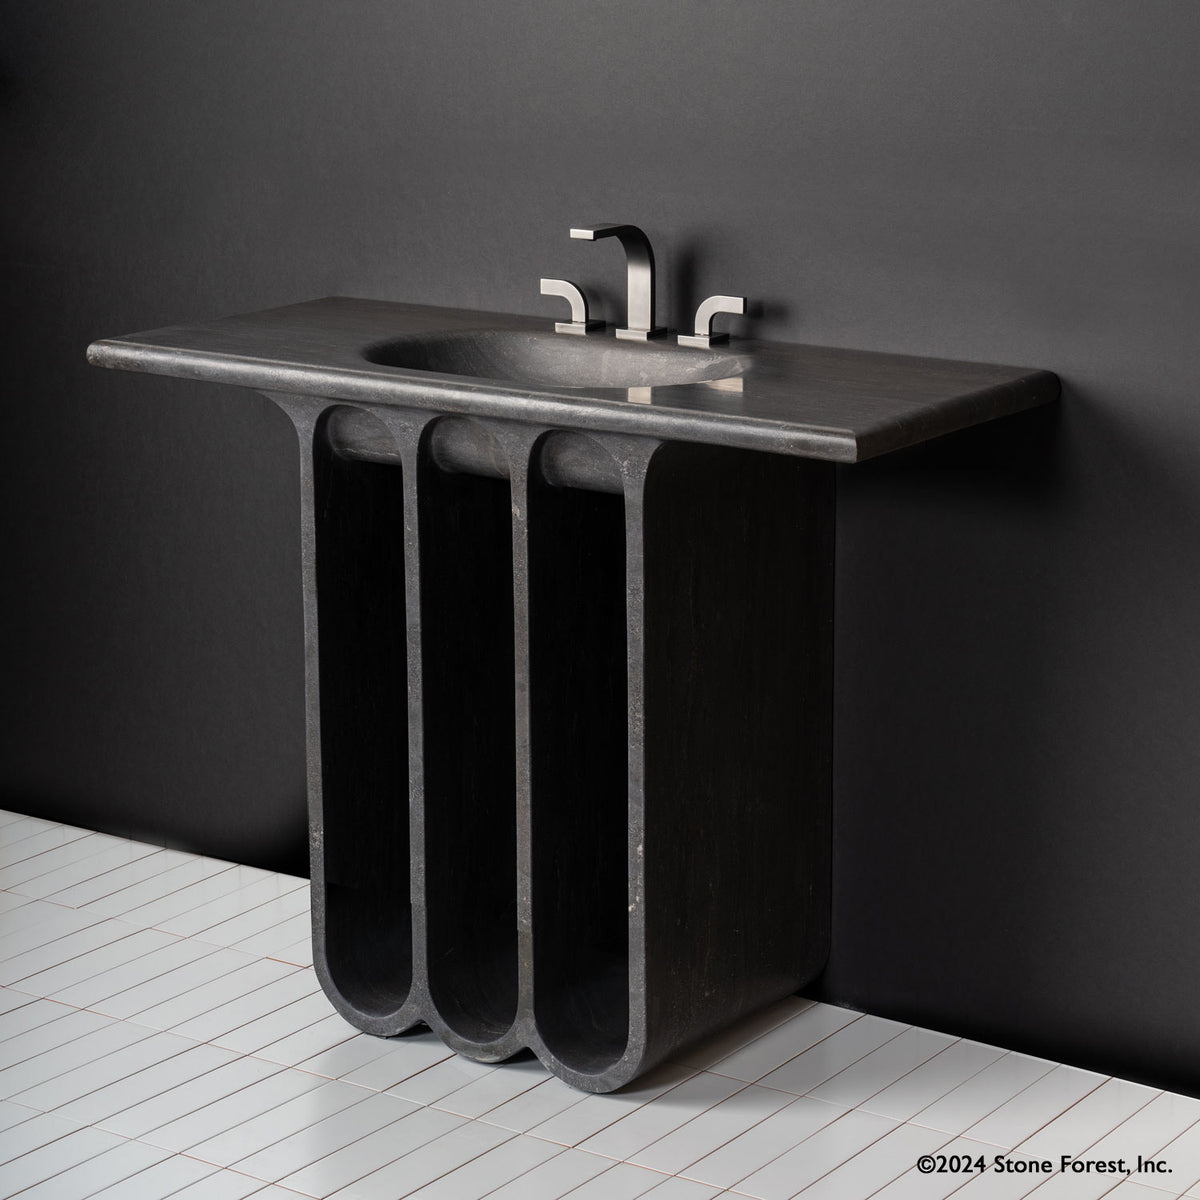 Portico Pedestal Bath Sink carved from a solid block of  antique gray limestone image 3 of 3